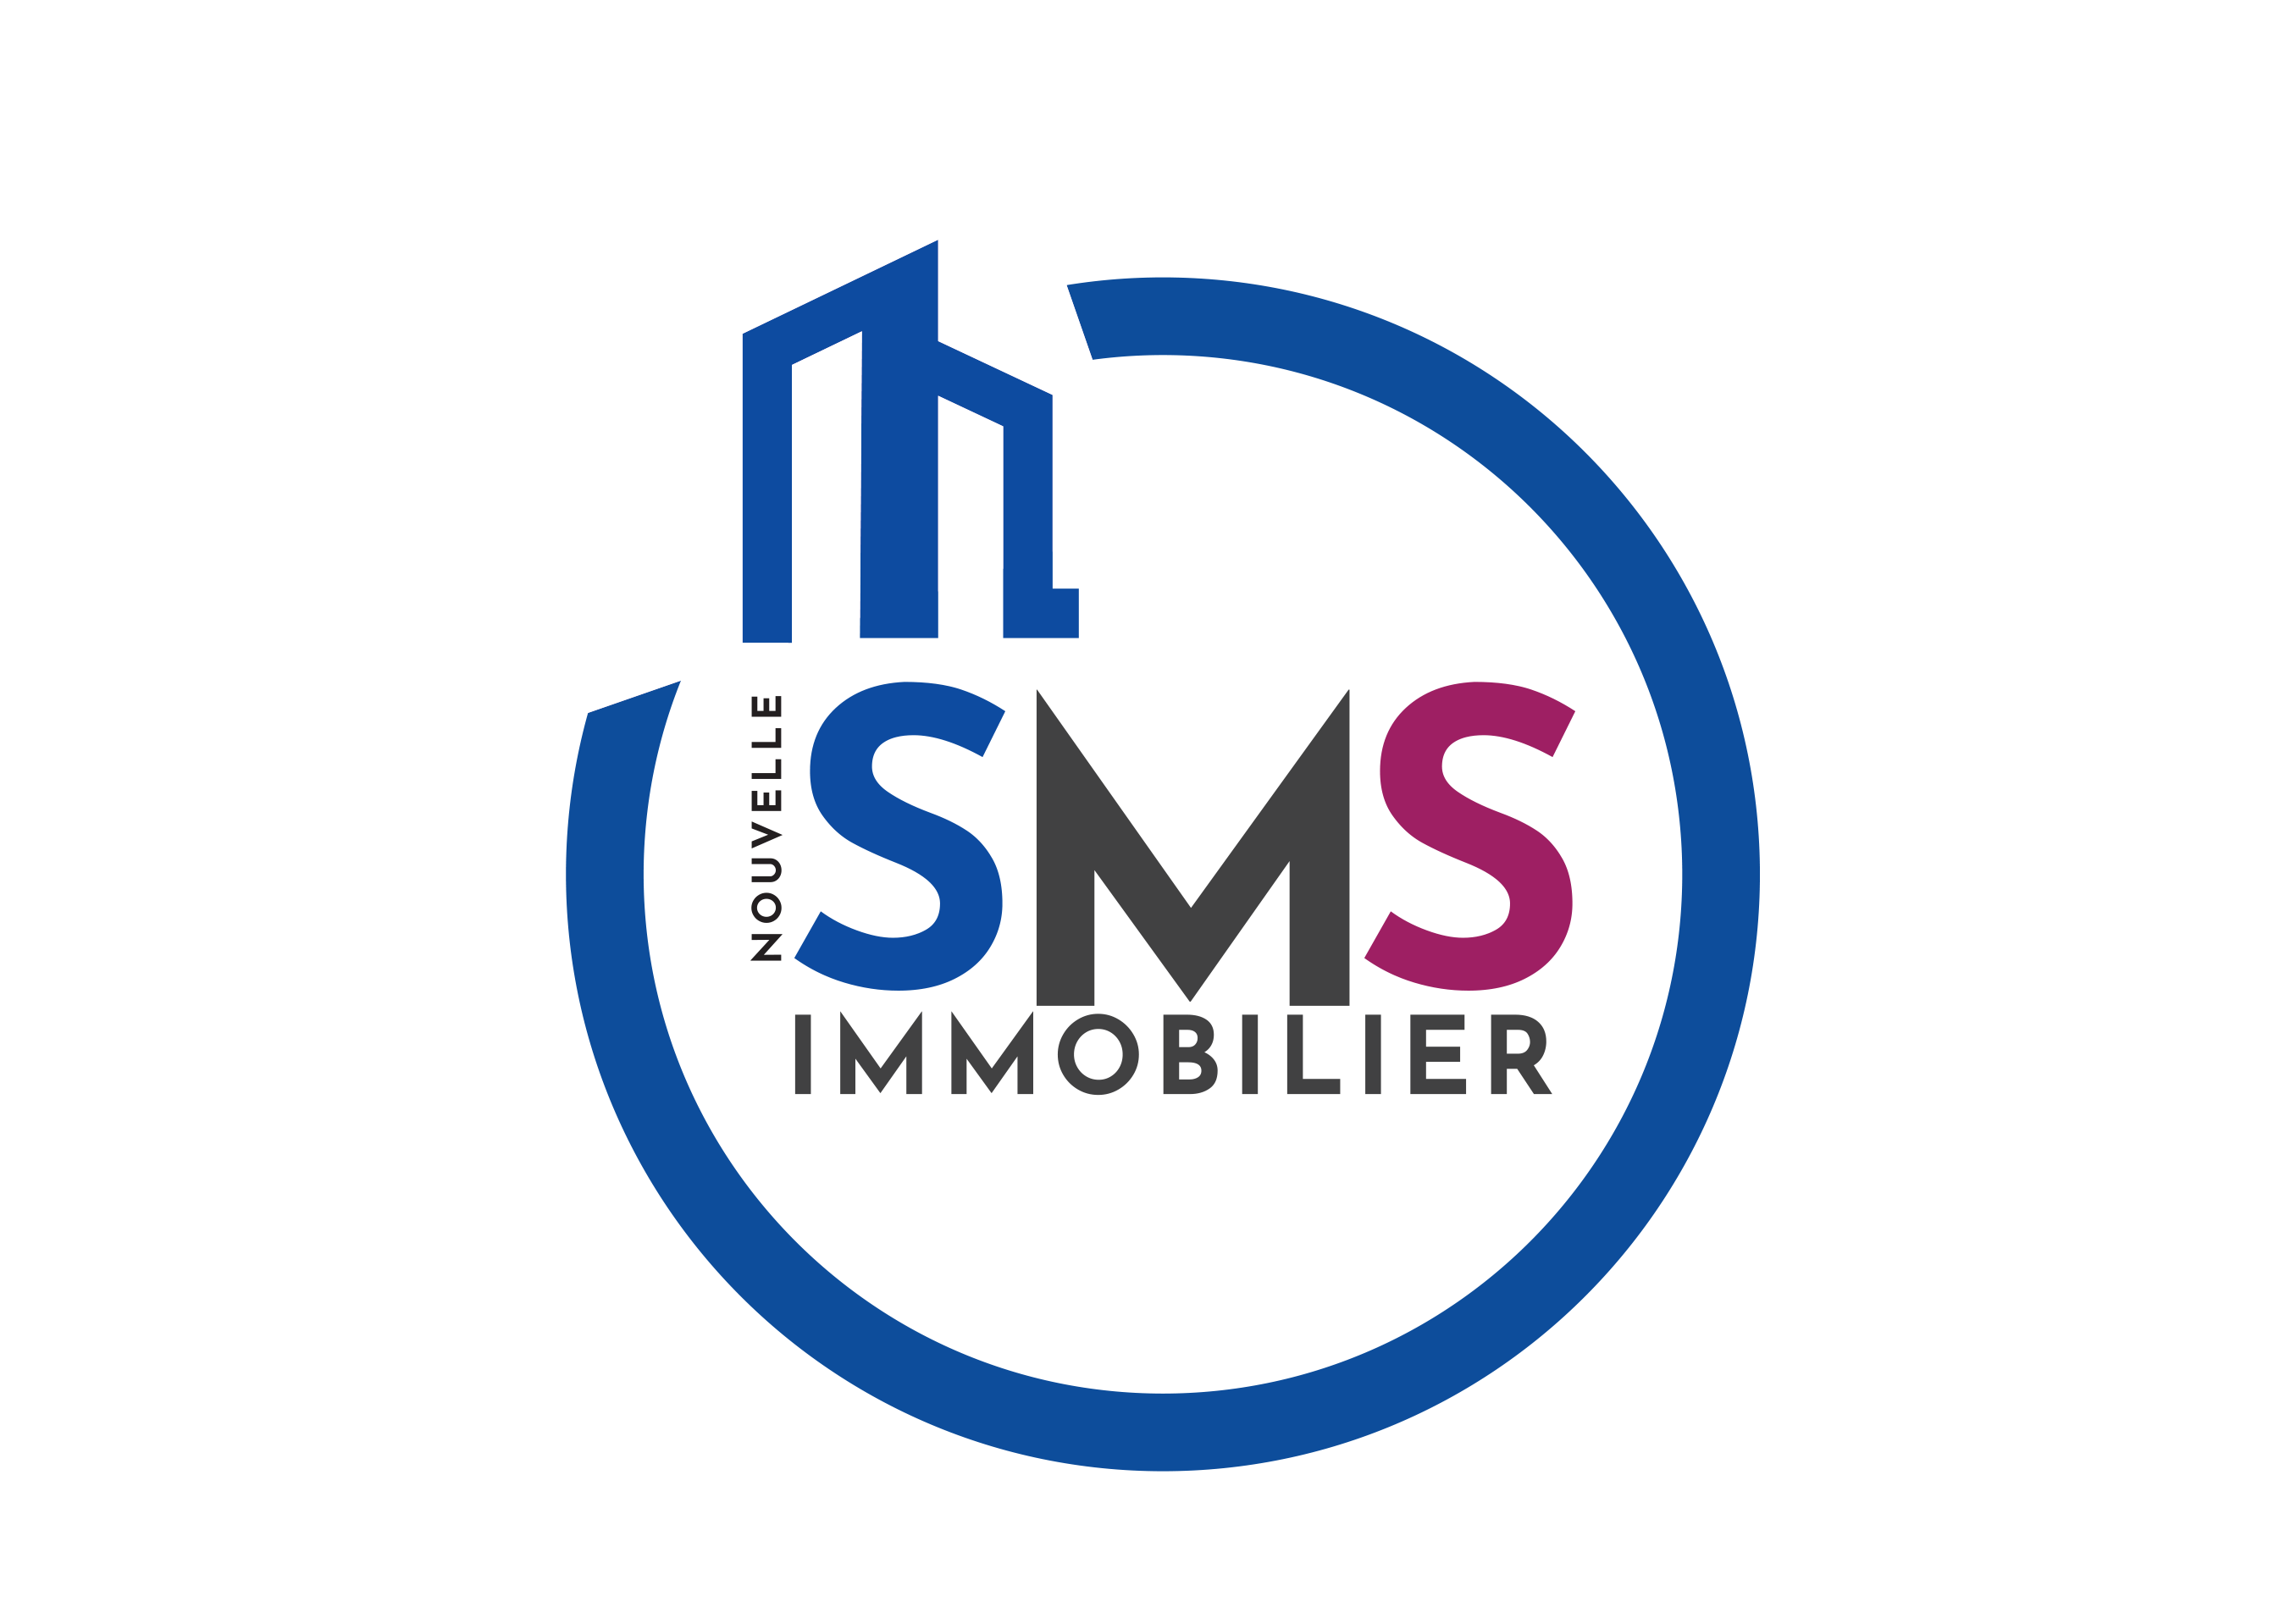 SMS IMMOBILIER